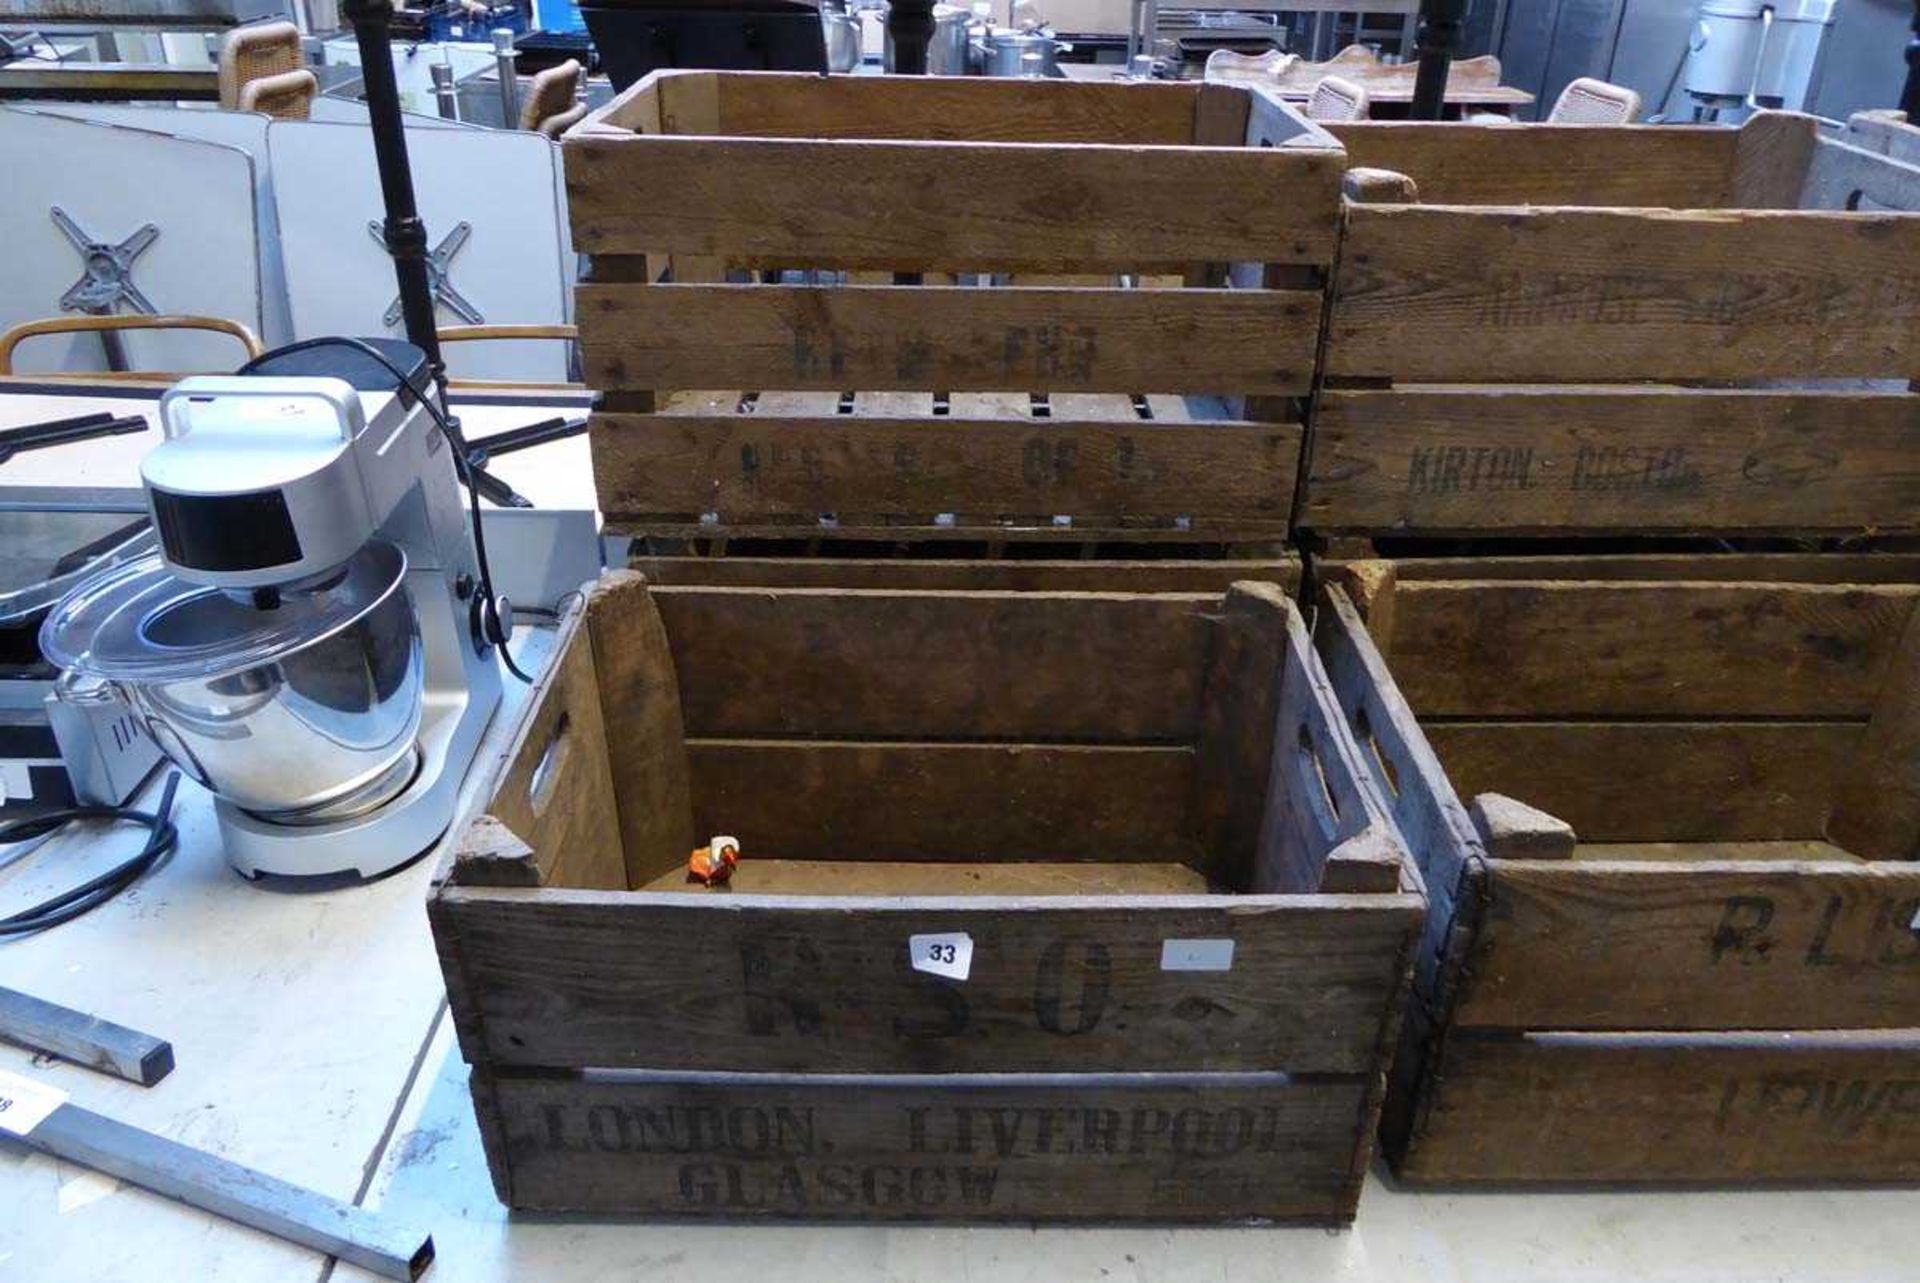 3 Mid 20th Century wooden produce crates